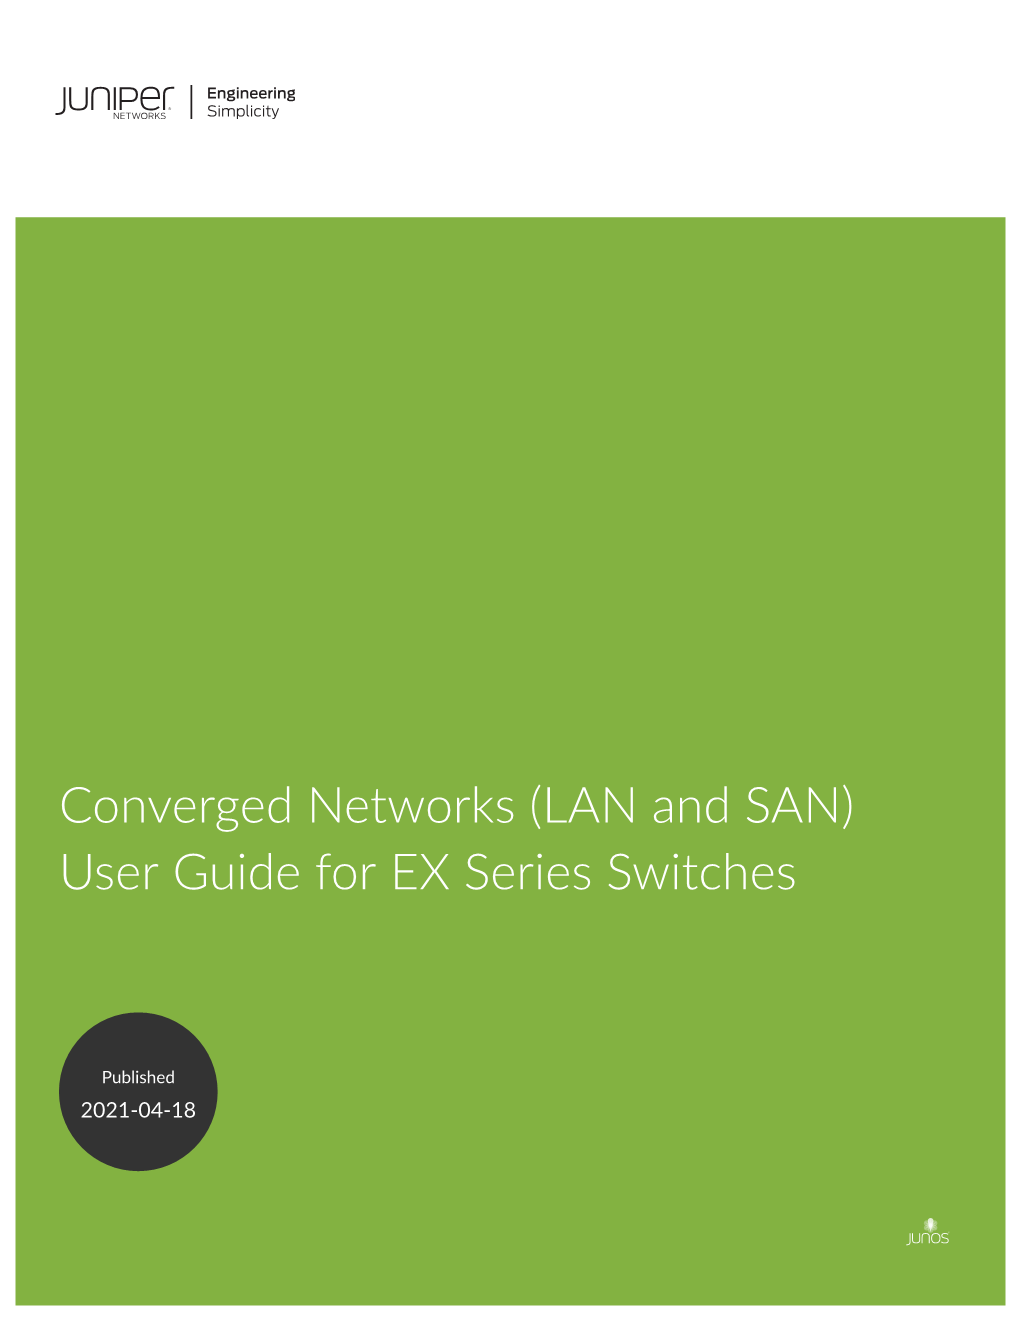 Converged Networks (LAN and SAN) User Guide for EX Series Switches